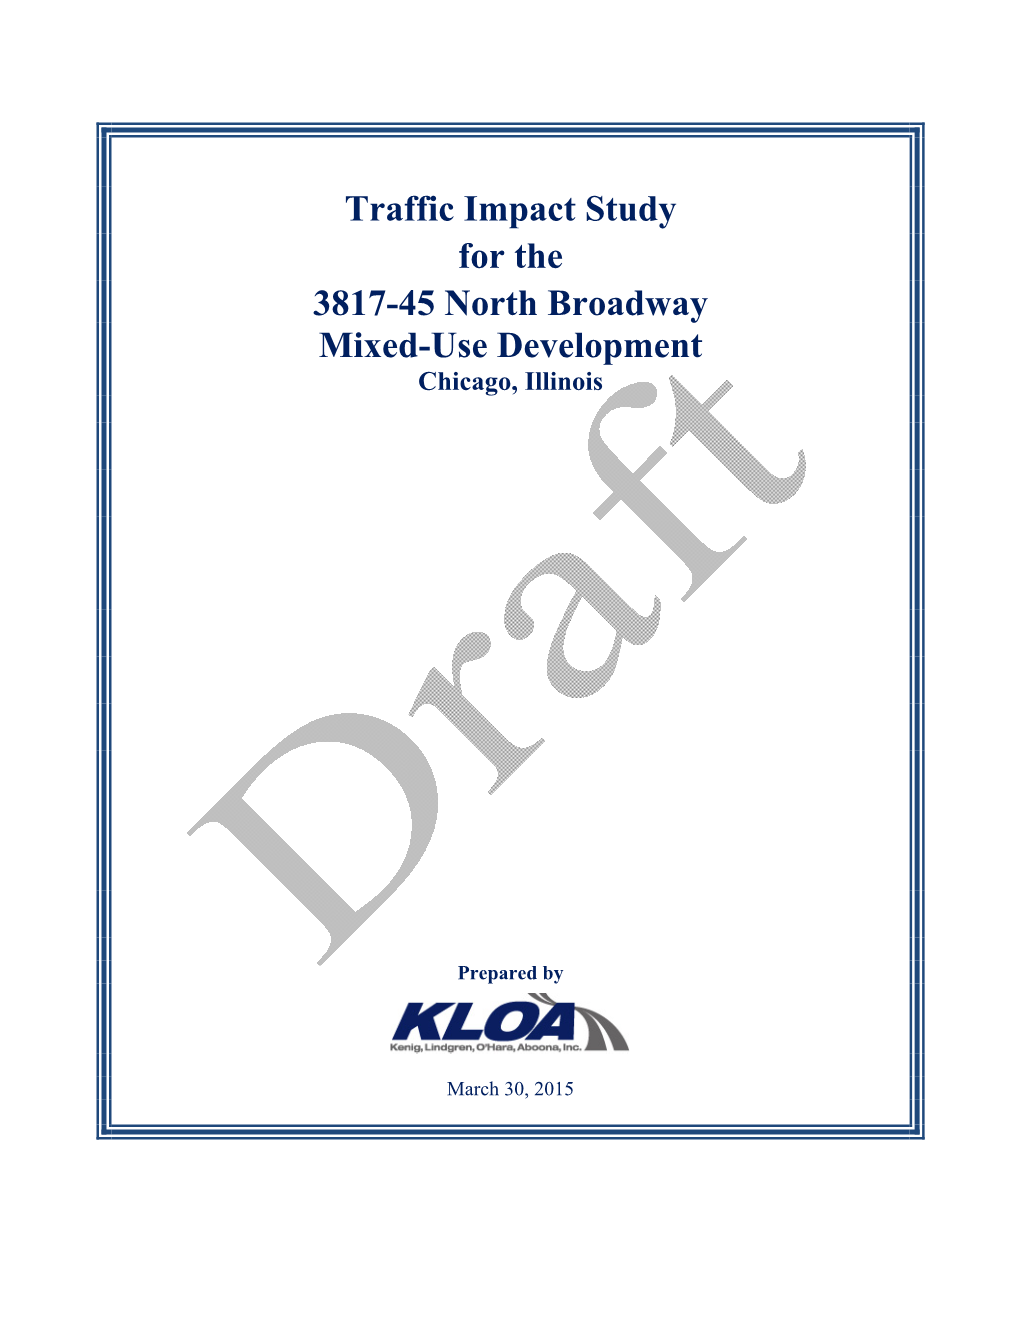 Traffic Impact Study for Mixed Used Development